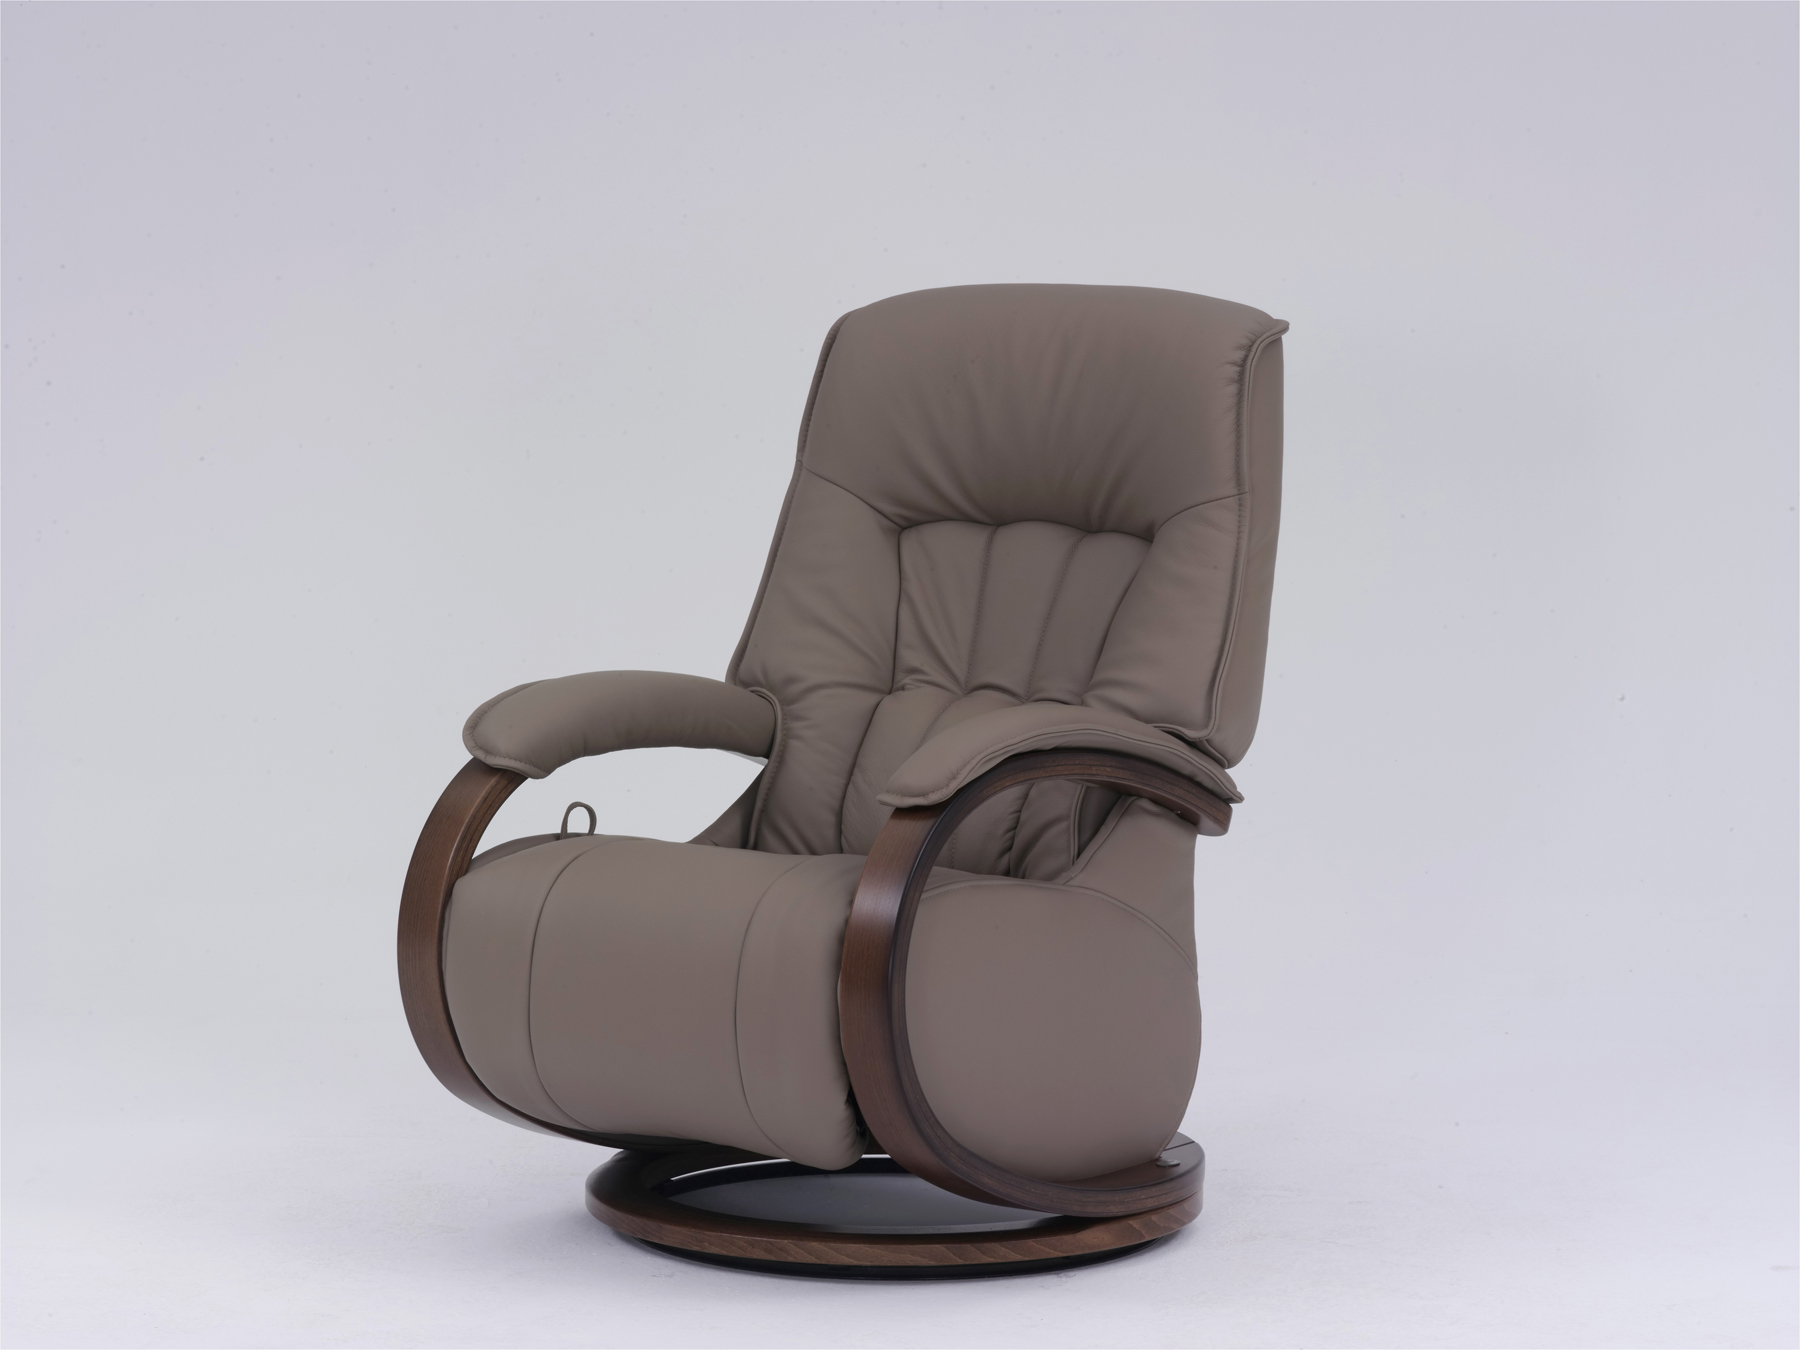 HIMOLLA MOSEL LEATHER CHAIR SIDE VIEW